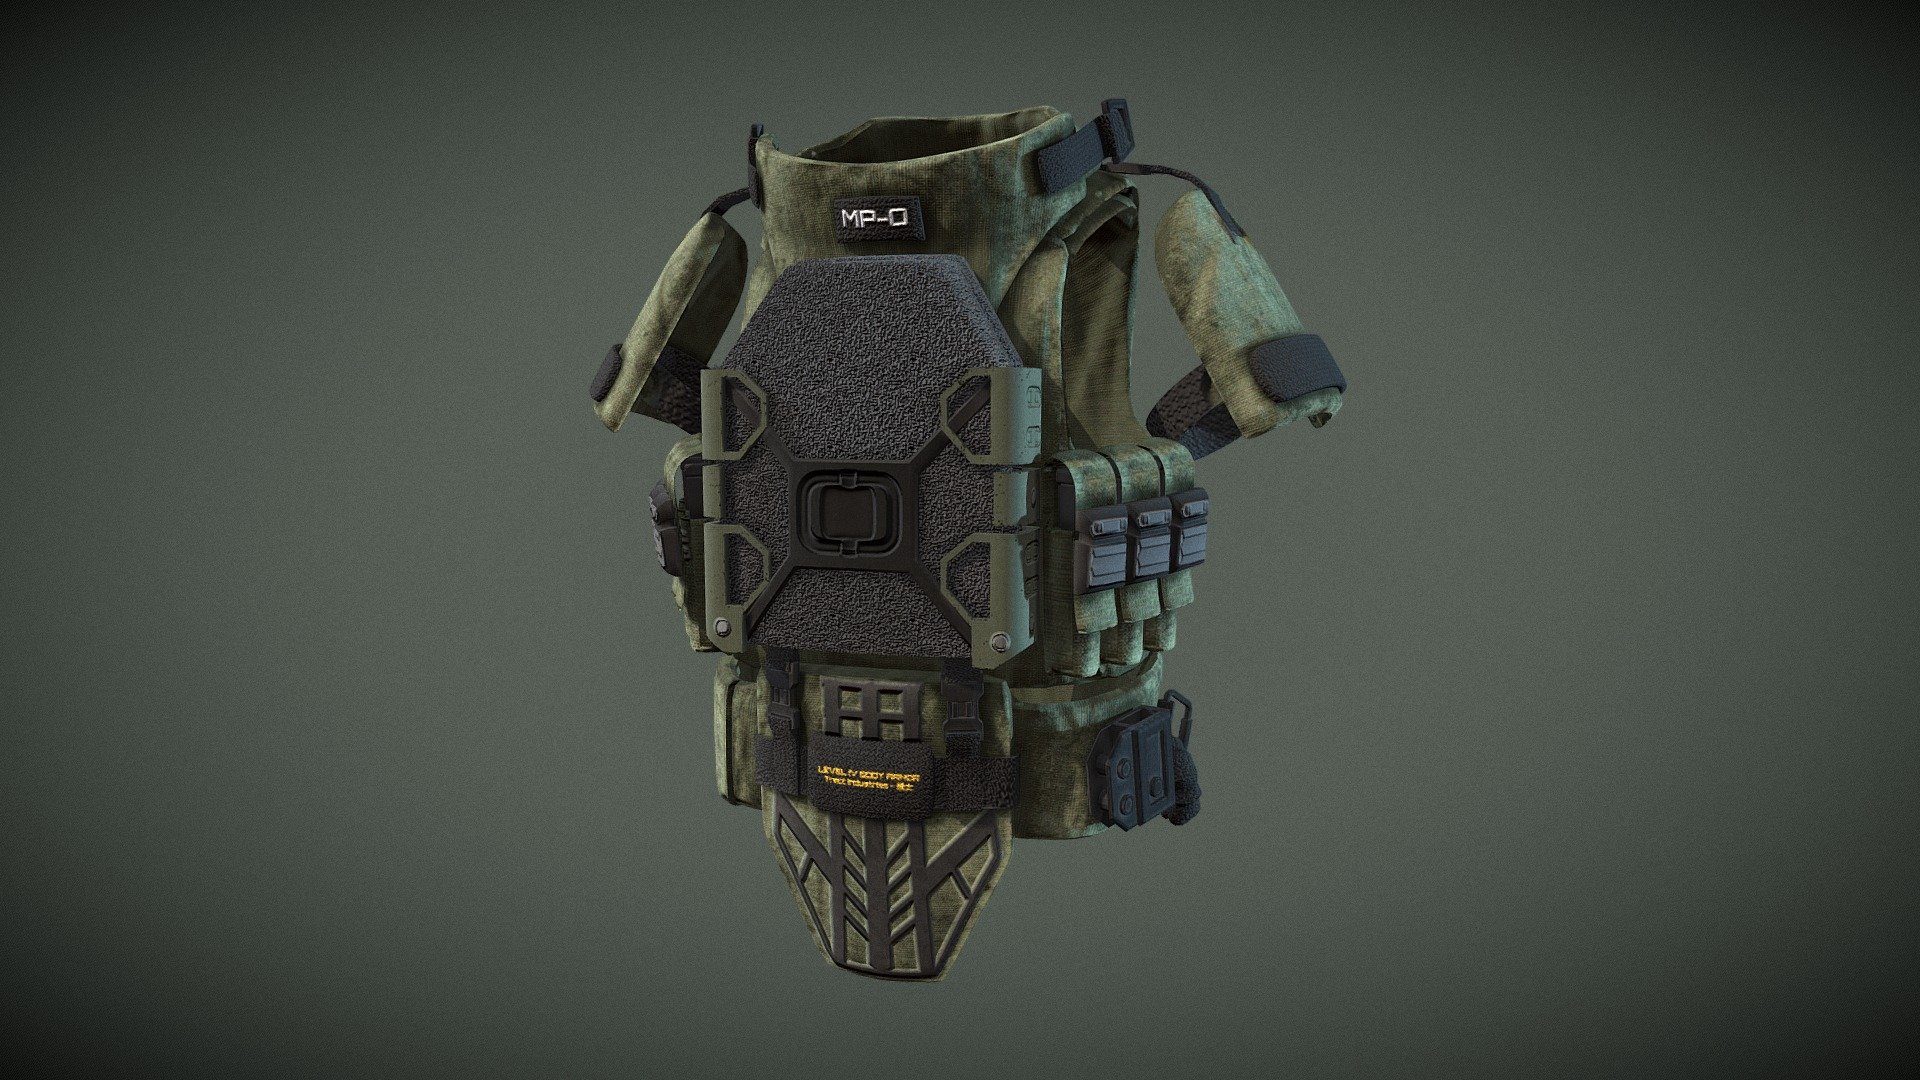 Level IV Military Vest Body Armor inspired from Nikto of Call of Duty - Model/Art by Outworld Studios

Must give credit to Outworld Studios if using the asset.

Show support by joining my discord: https://discord.gg/EgWSkp8Cxn - Level IV Military Vest Body Armor - Buy Royalty Free 3D model by Outworld Studios (@outworldstudios) 3d model